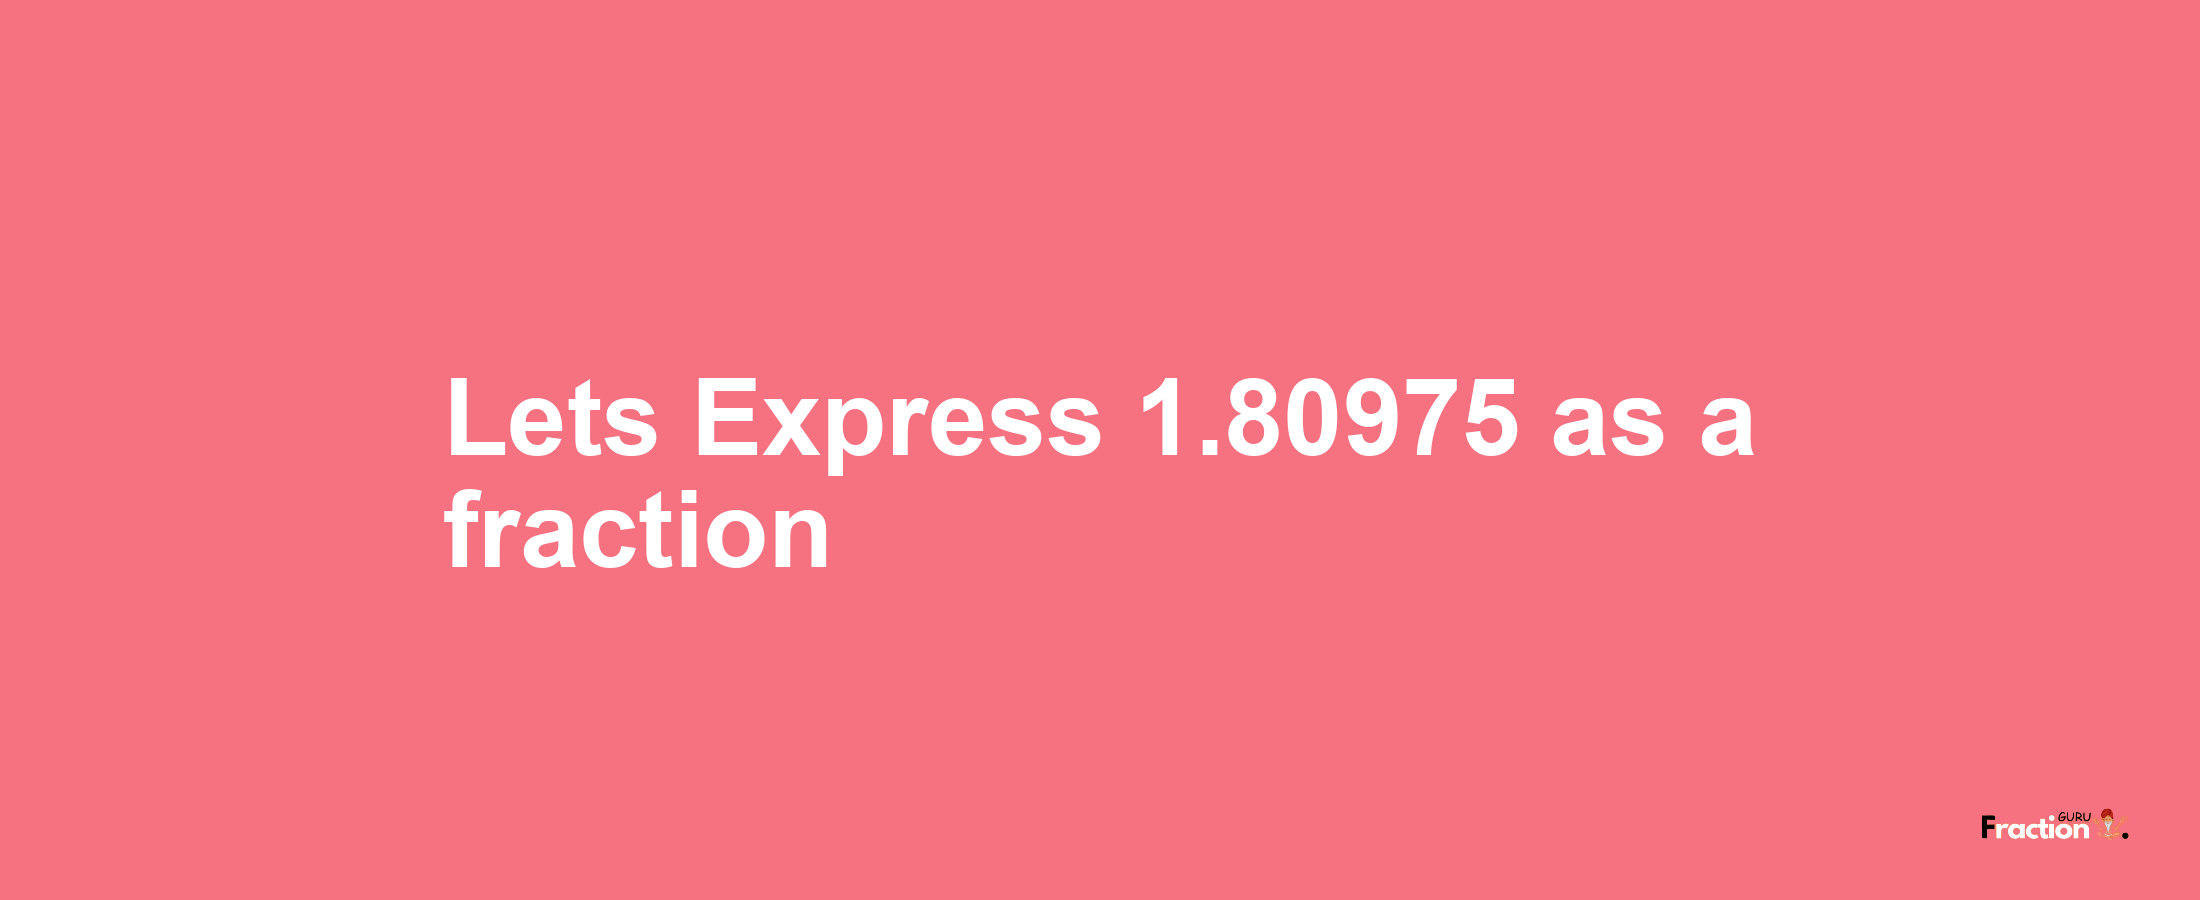 Lets Express 1.80975 as afraction